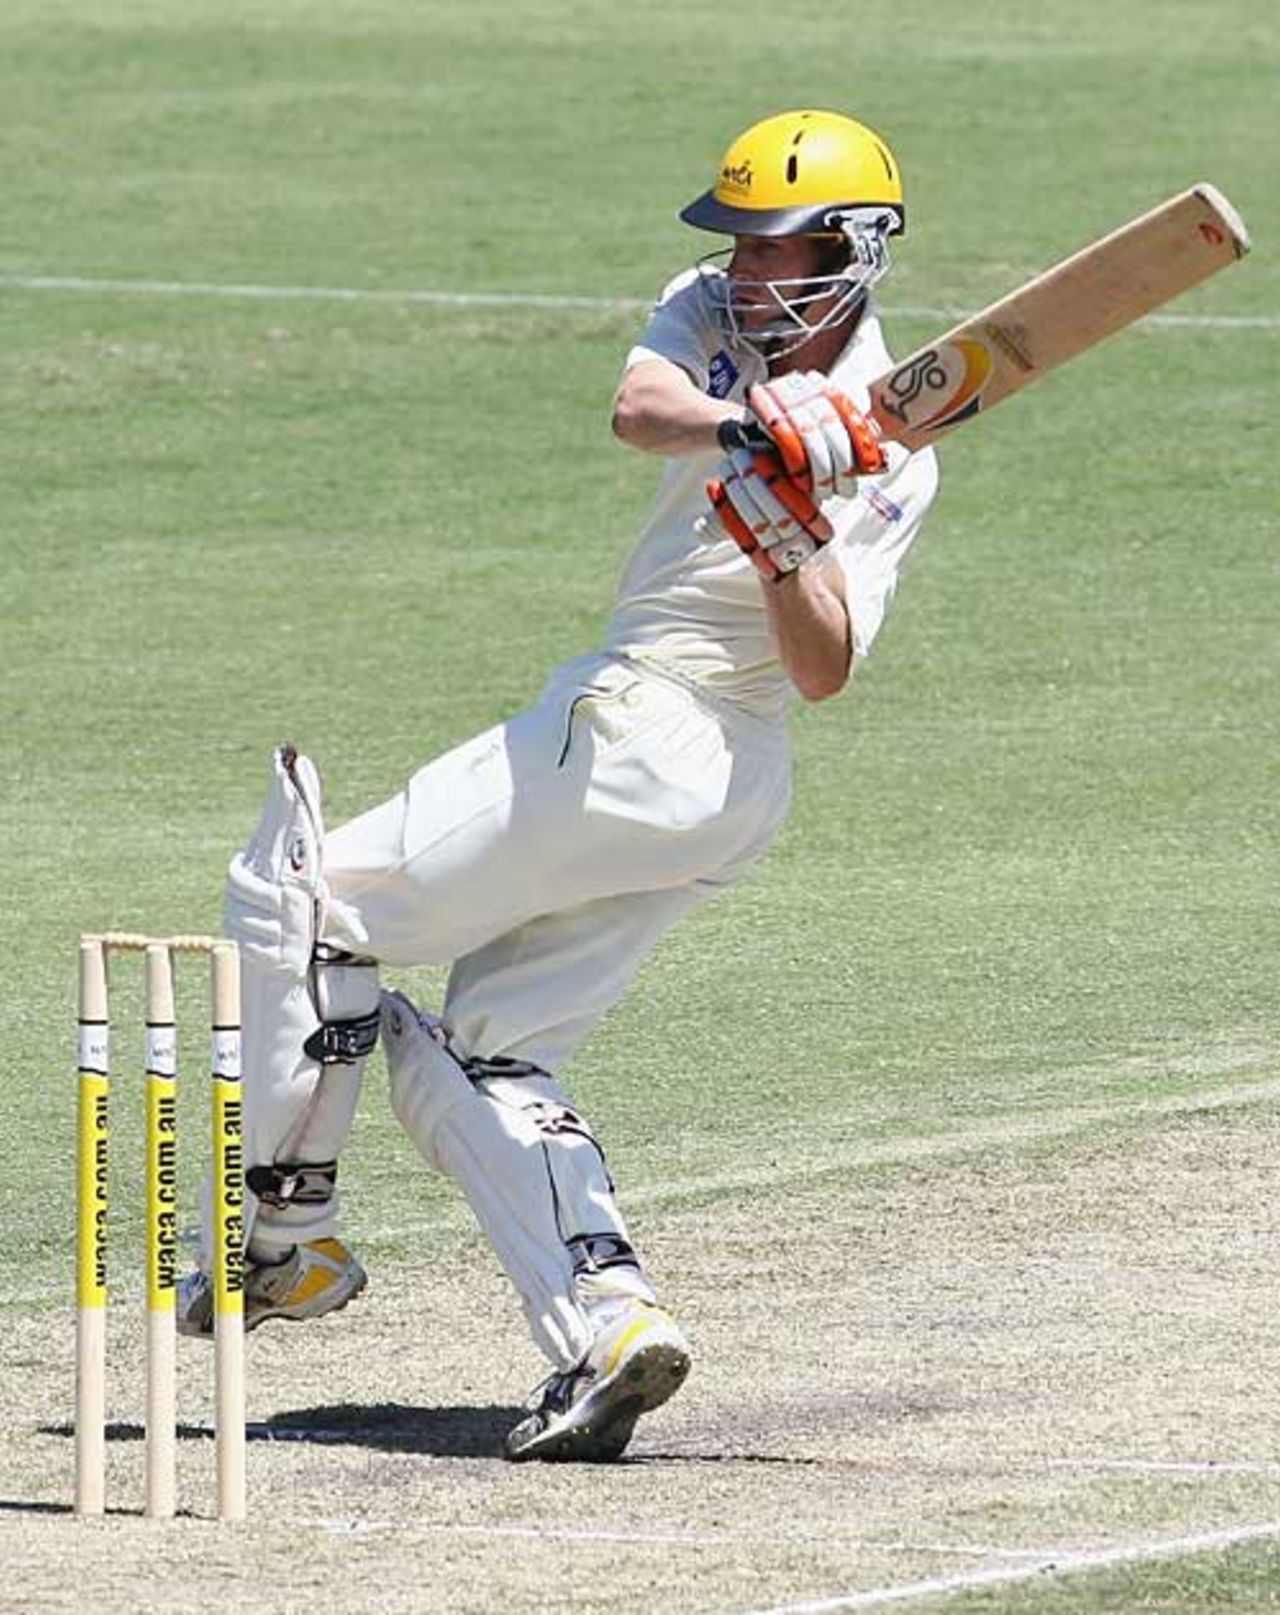 Adam Voges hit 31 the day after his Test call-up, Western Australia v England XI, Perth, December 9, 2006